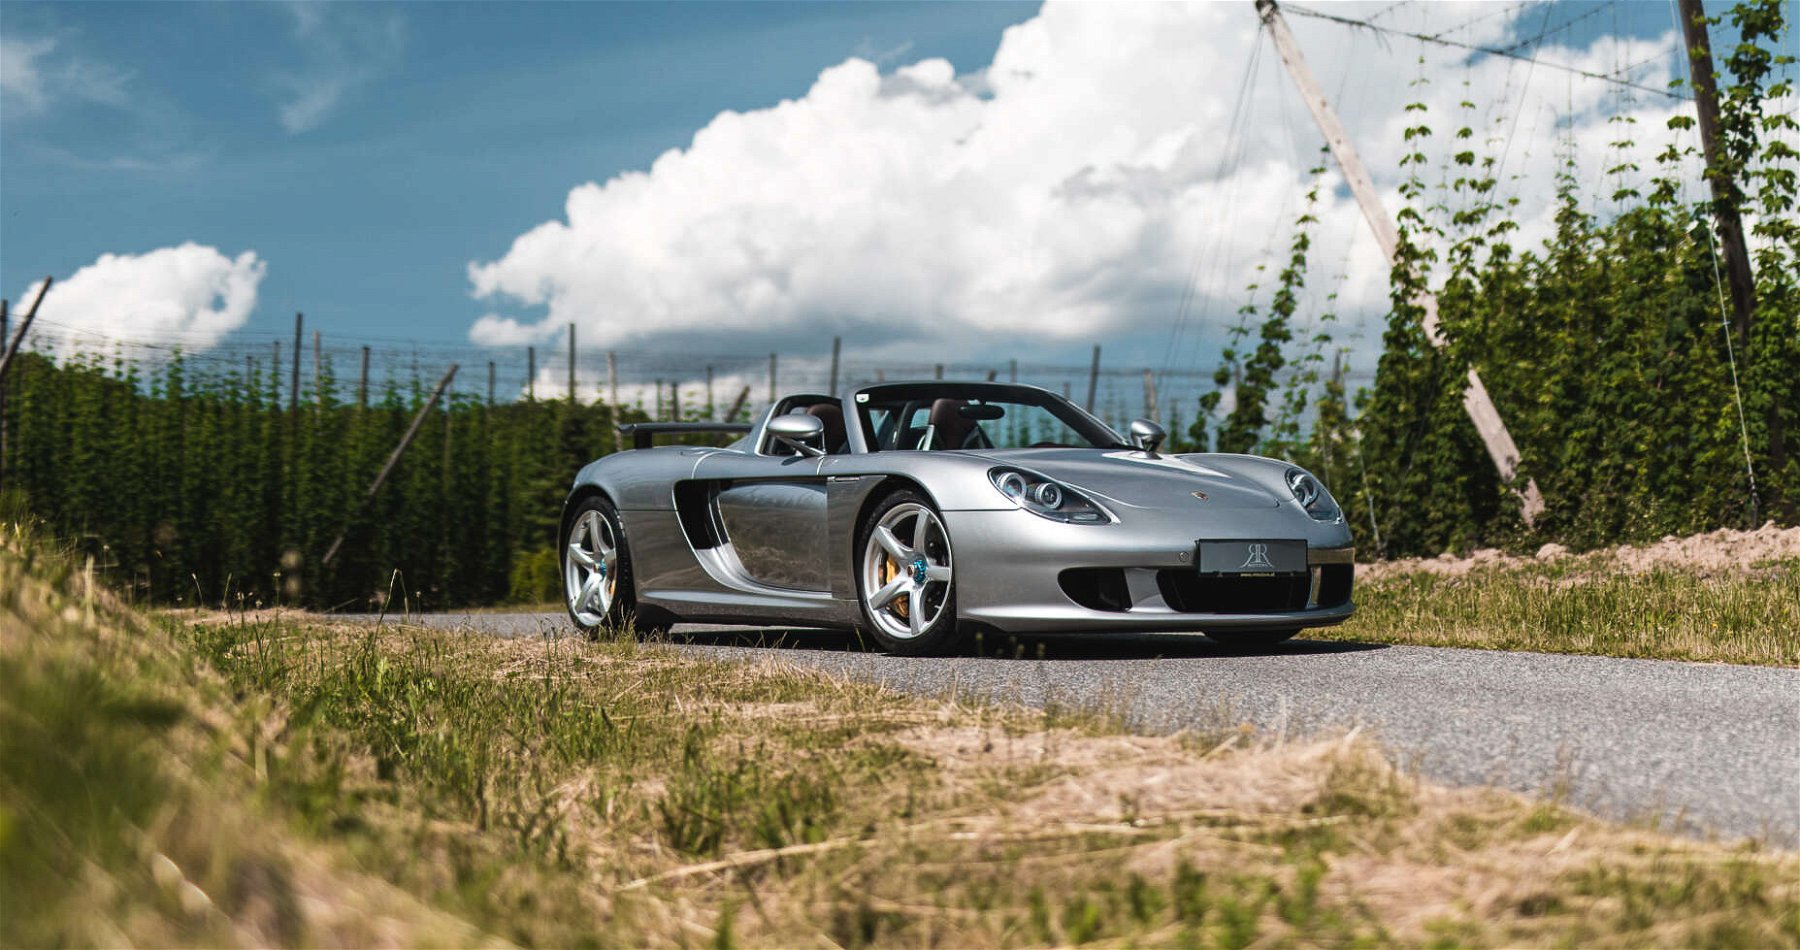 The history of the Porsche Carrera GT – From F1, to Le Mans, to the road